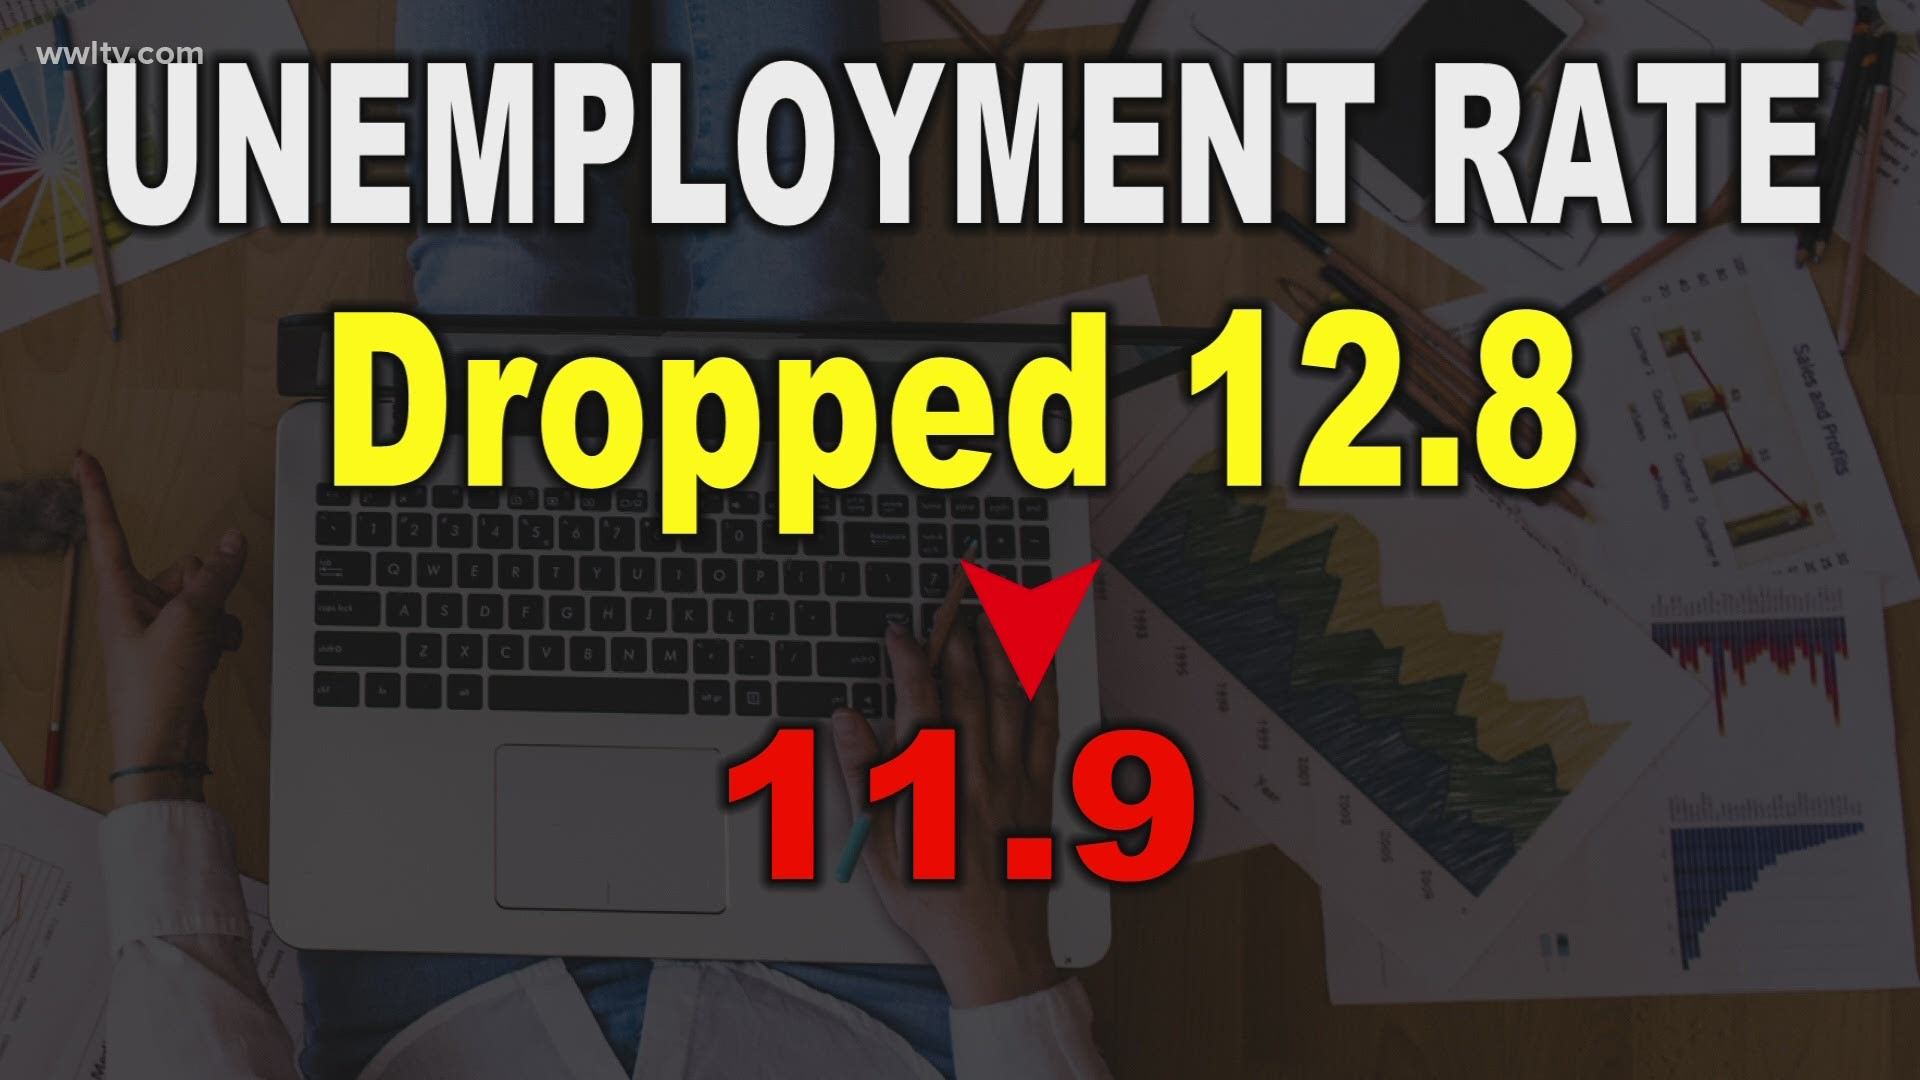 Louisiana unemployment numbers are dropping as jobs are becoming more available.